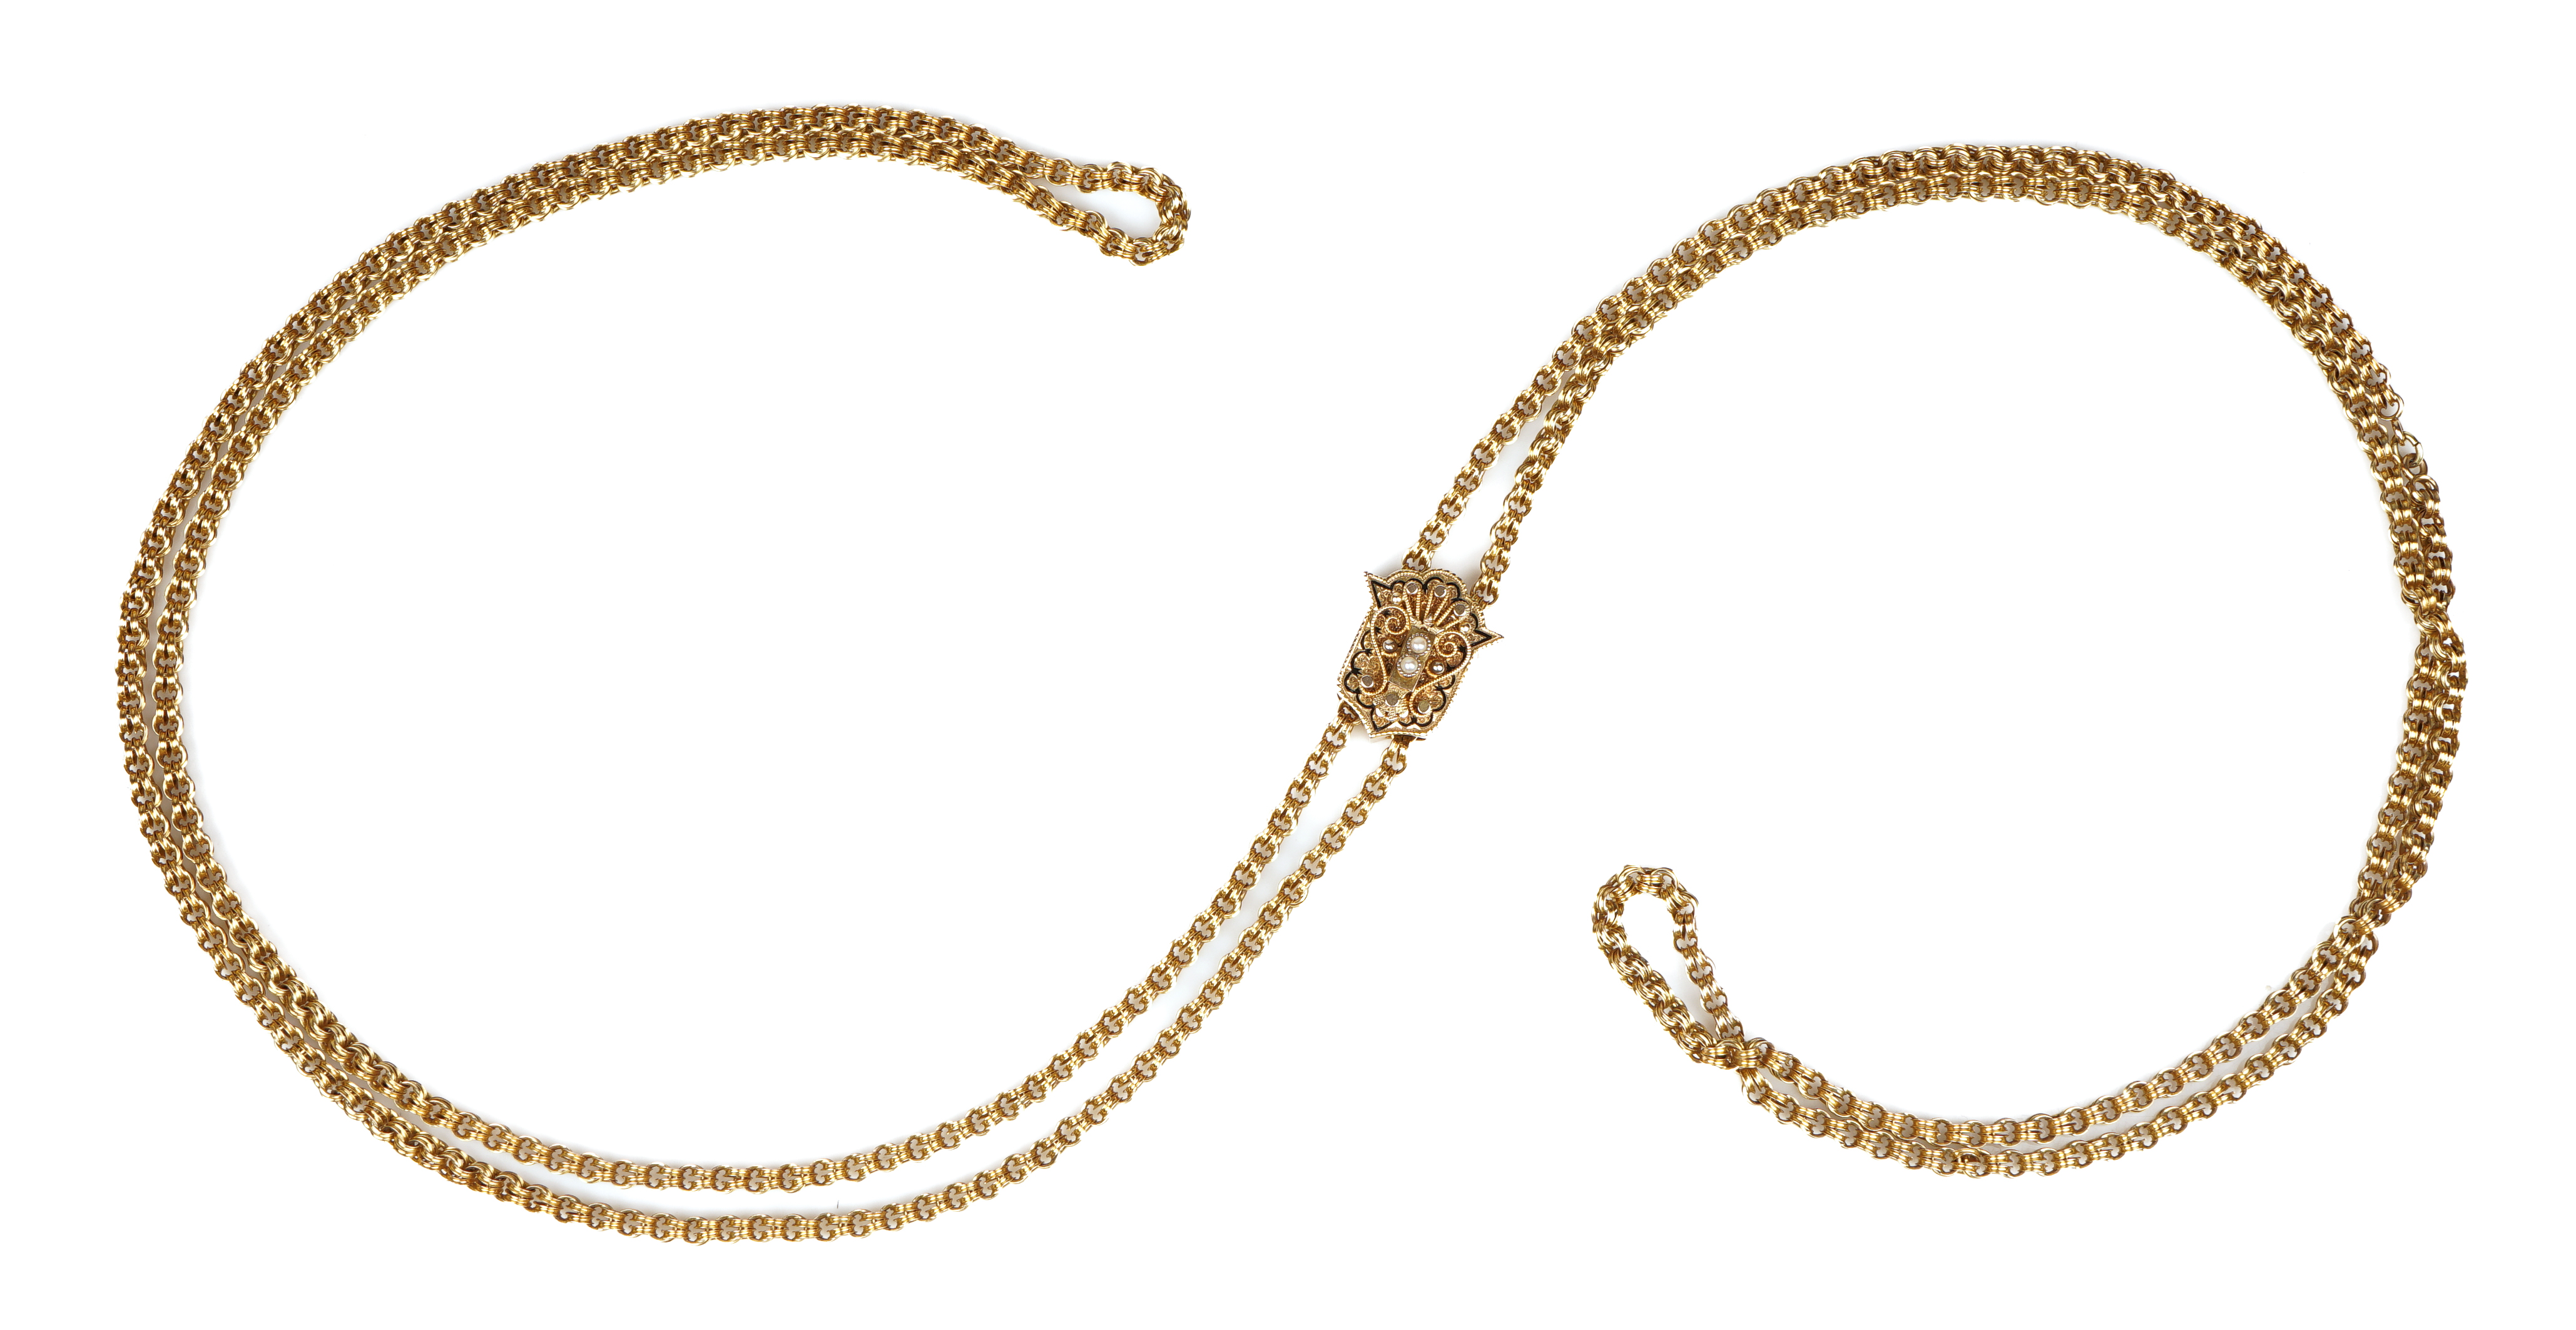 A Gold Chain with Seed Pearl Black